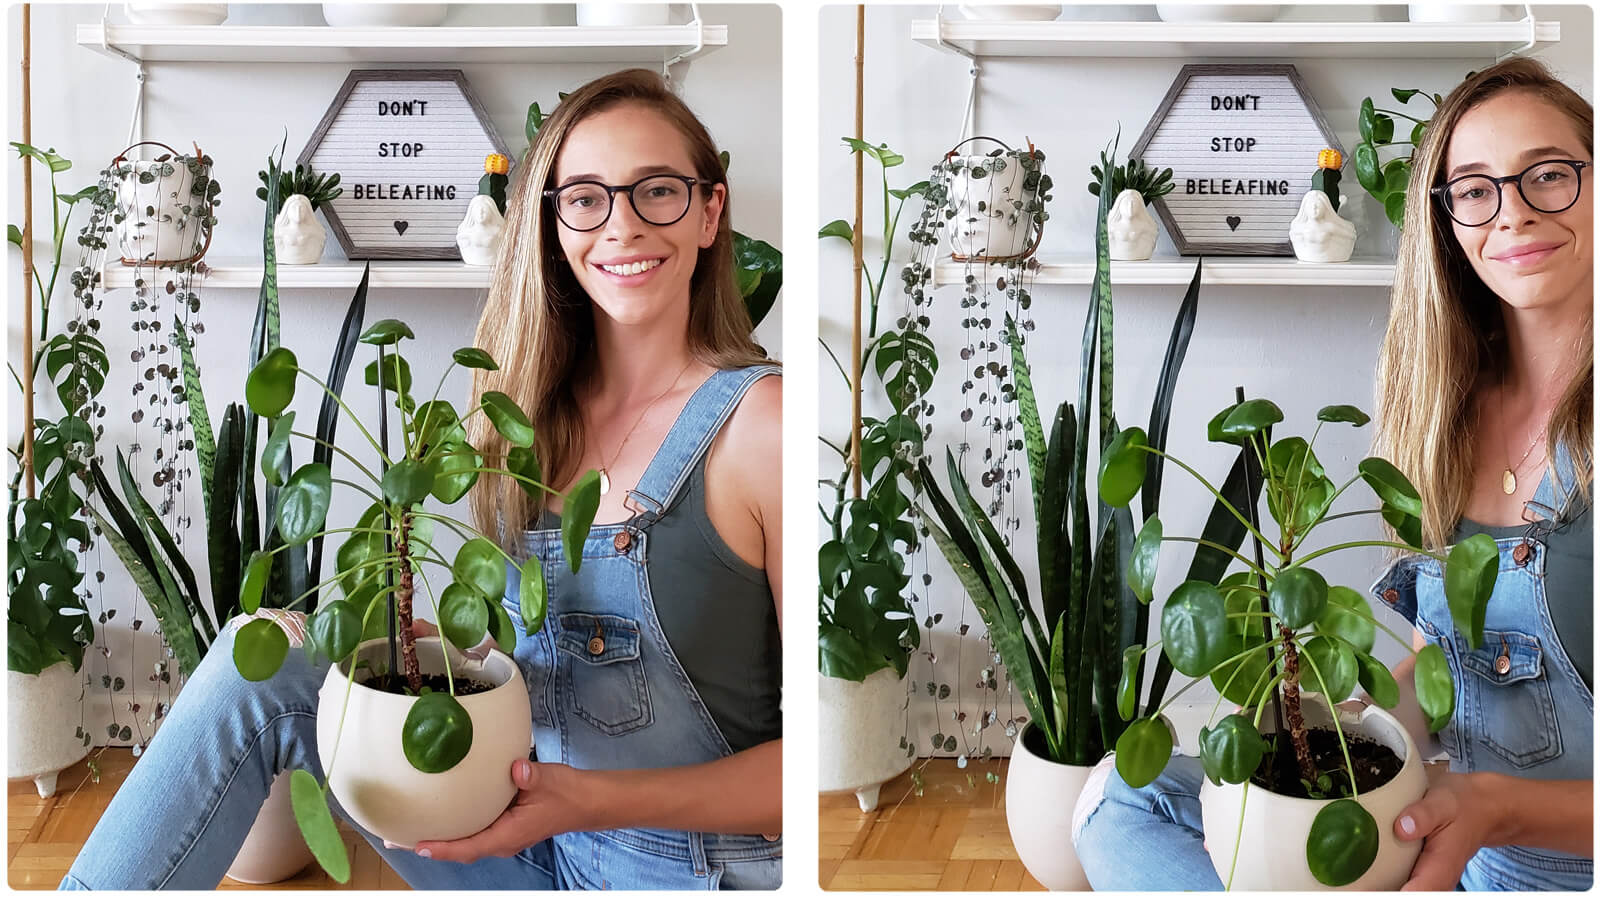 Maria happily poses with her favorite Pilea and other plants in front of her white wall with an antique, dark-colored clock.